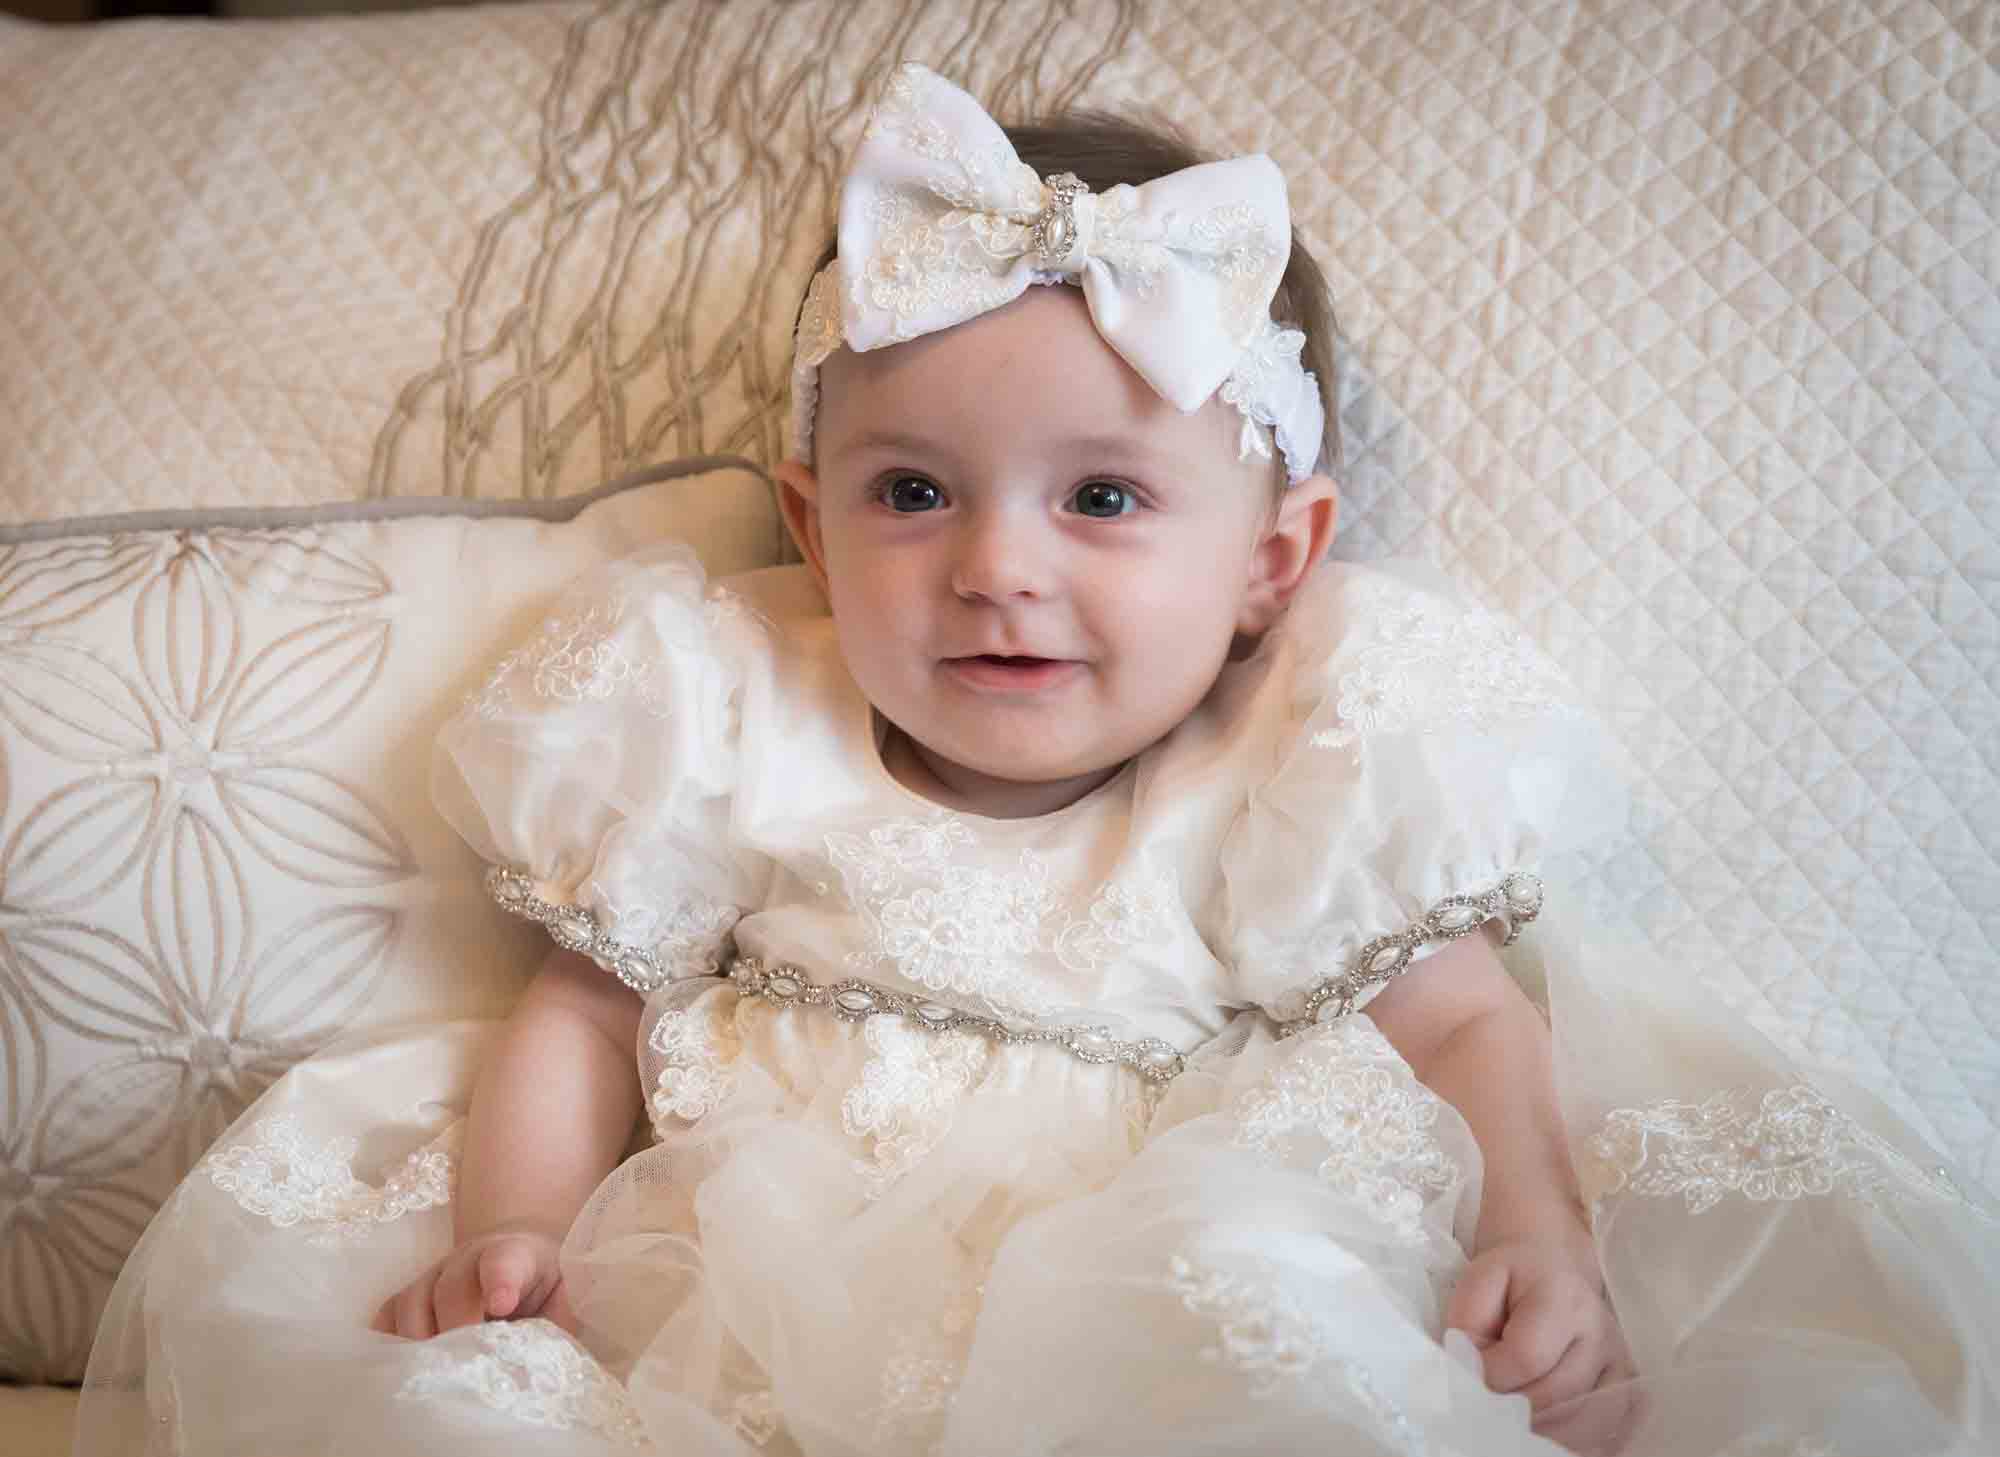 Baby girl wearing white baptism dress and white bow sitting in front of pillows